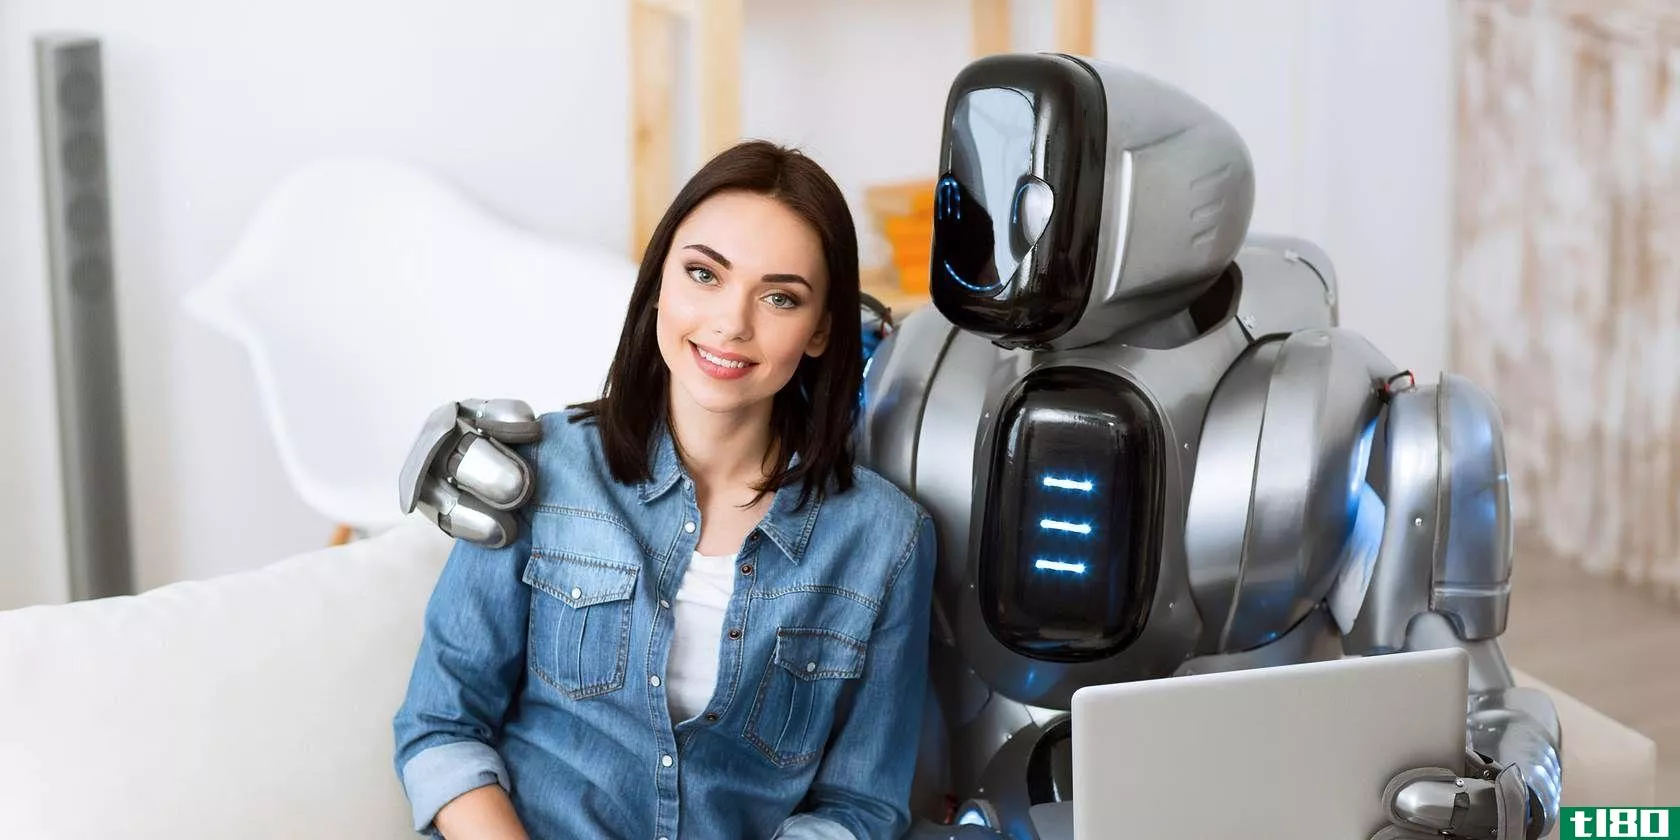 robot-home-companion-featured